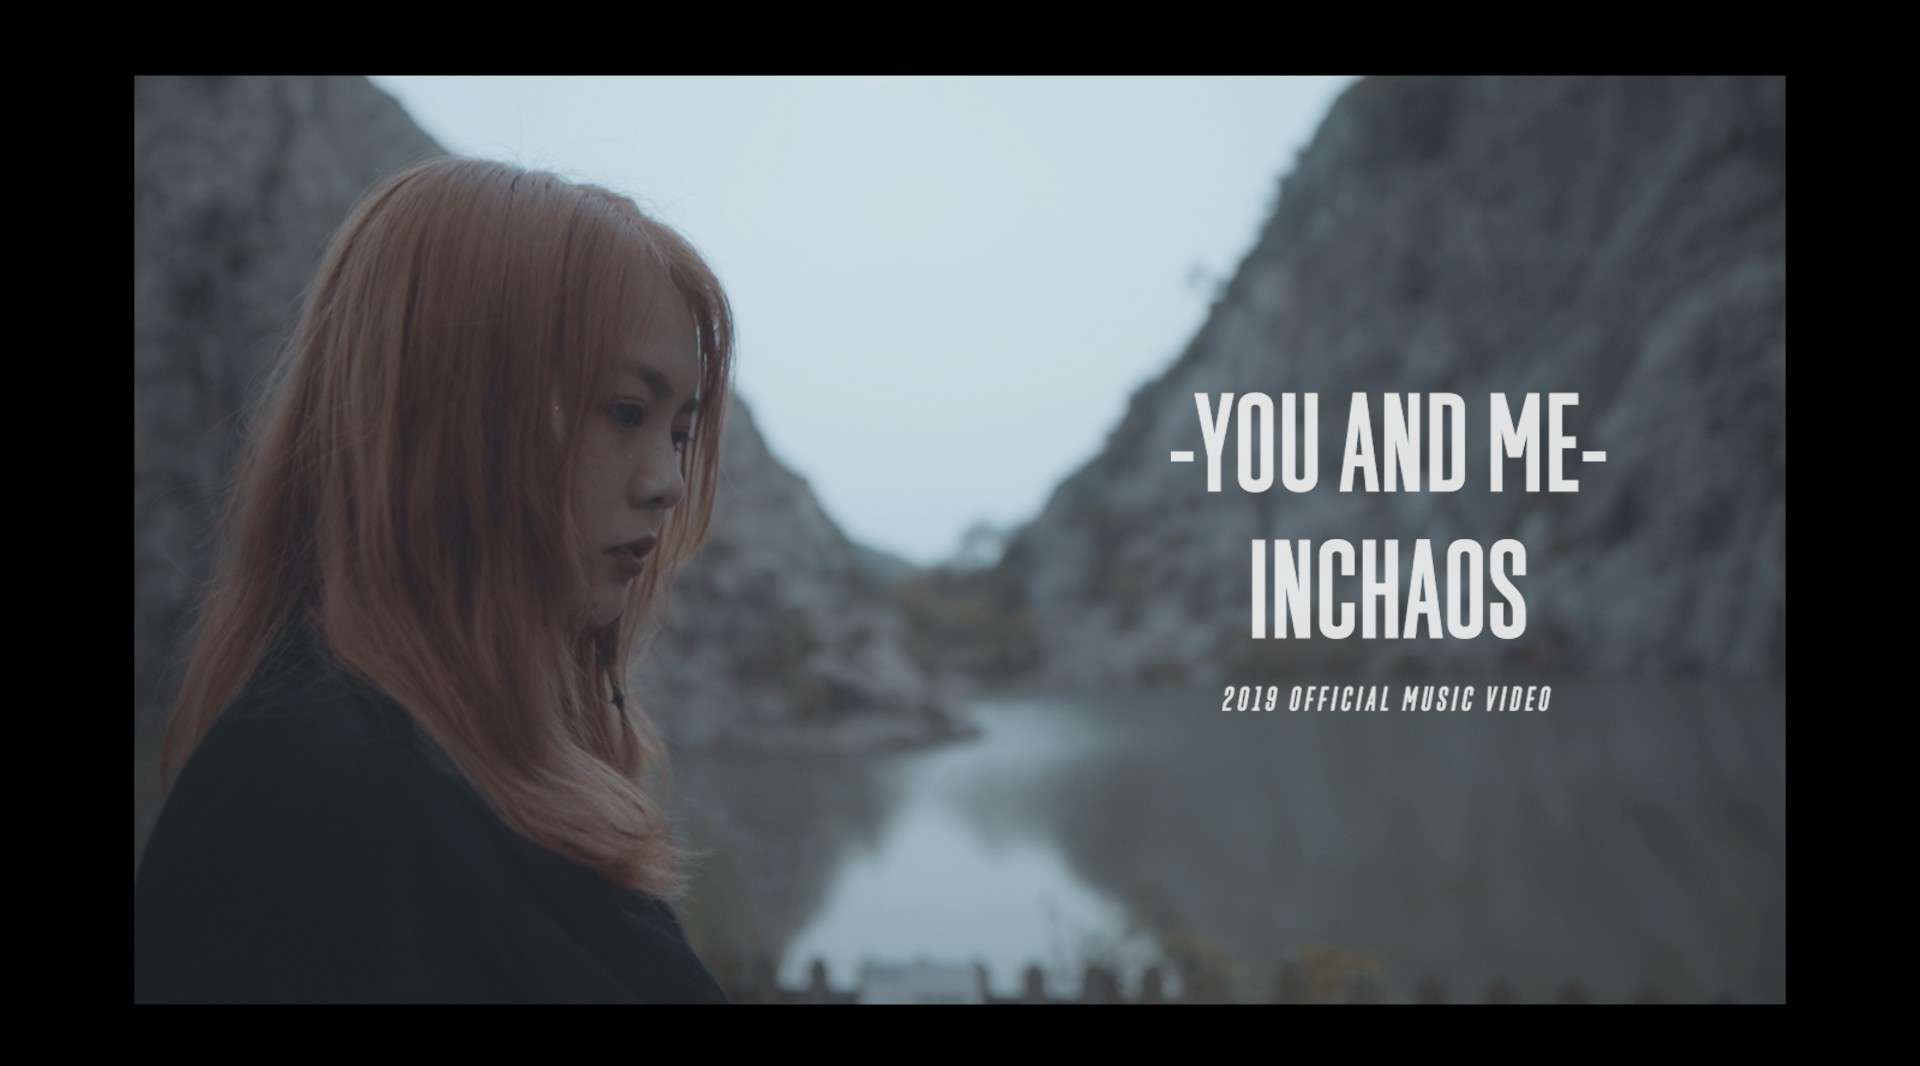 YOU AND ME - INCHAOS 2019 OFFICIAL MUSIC VIDEO